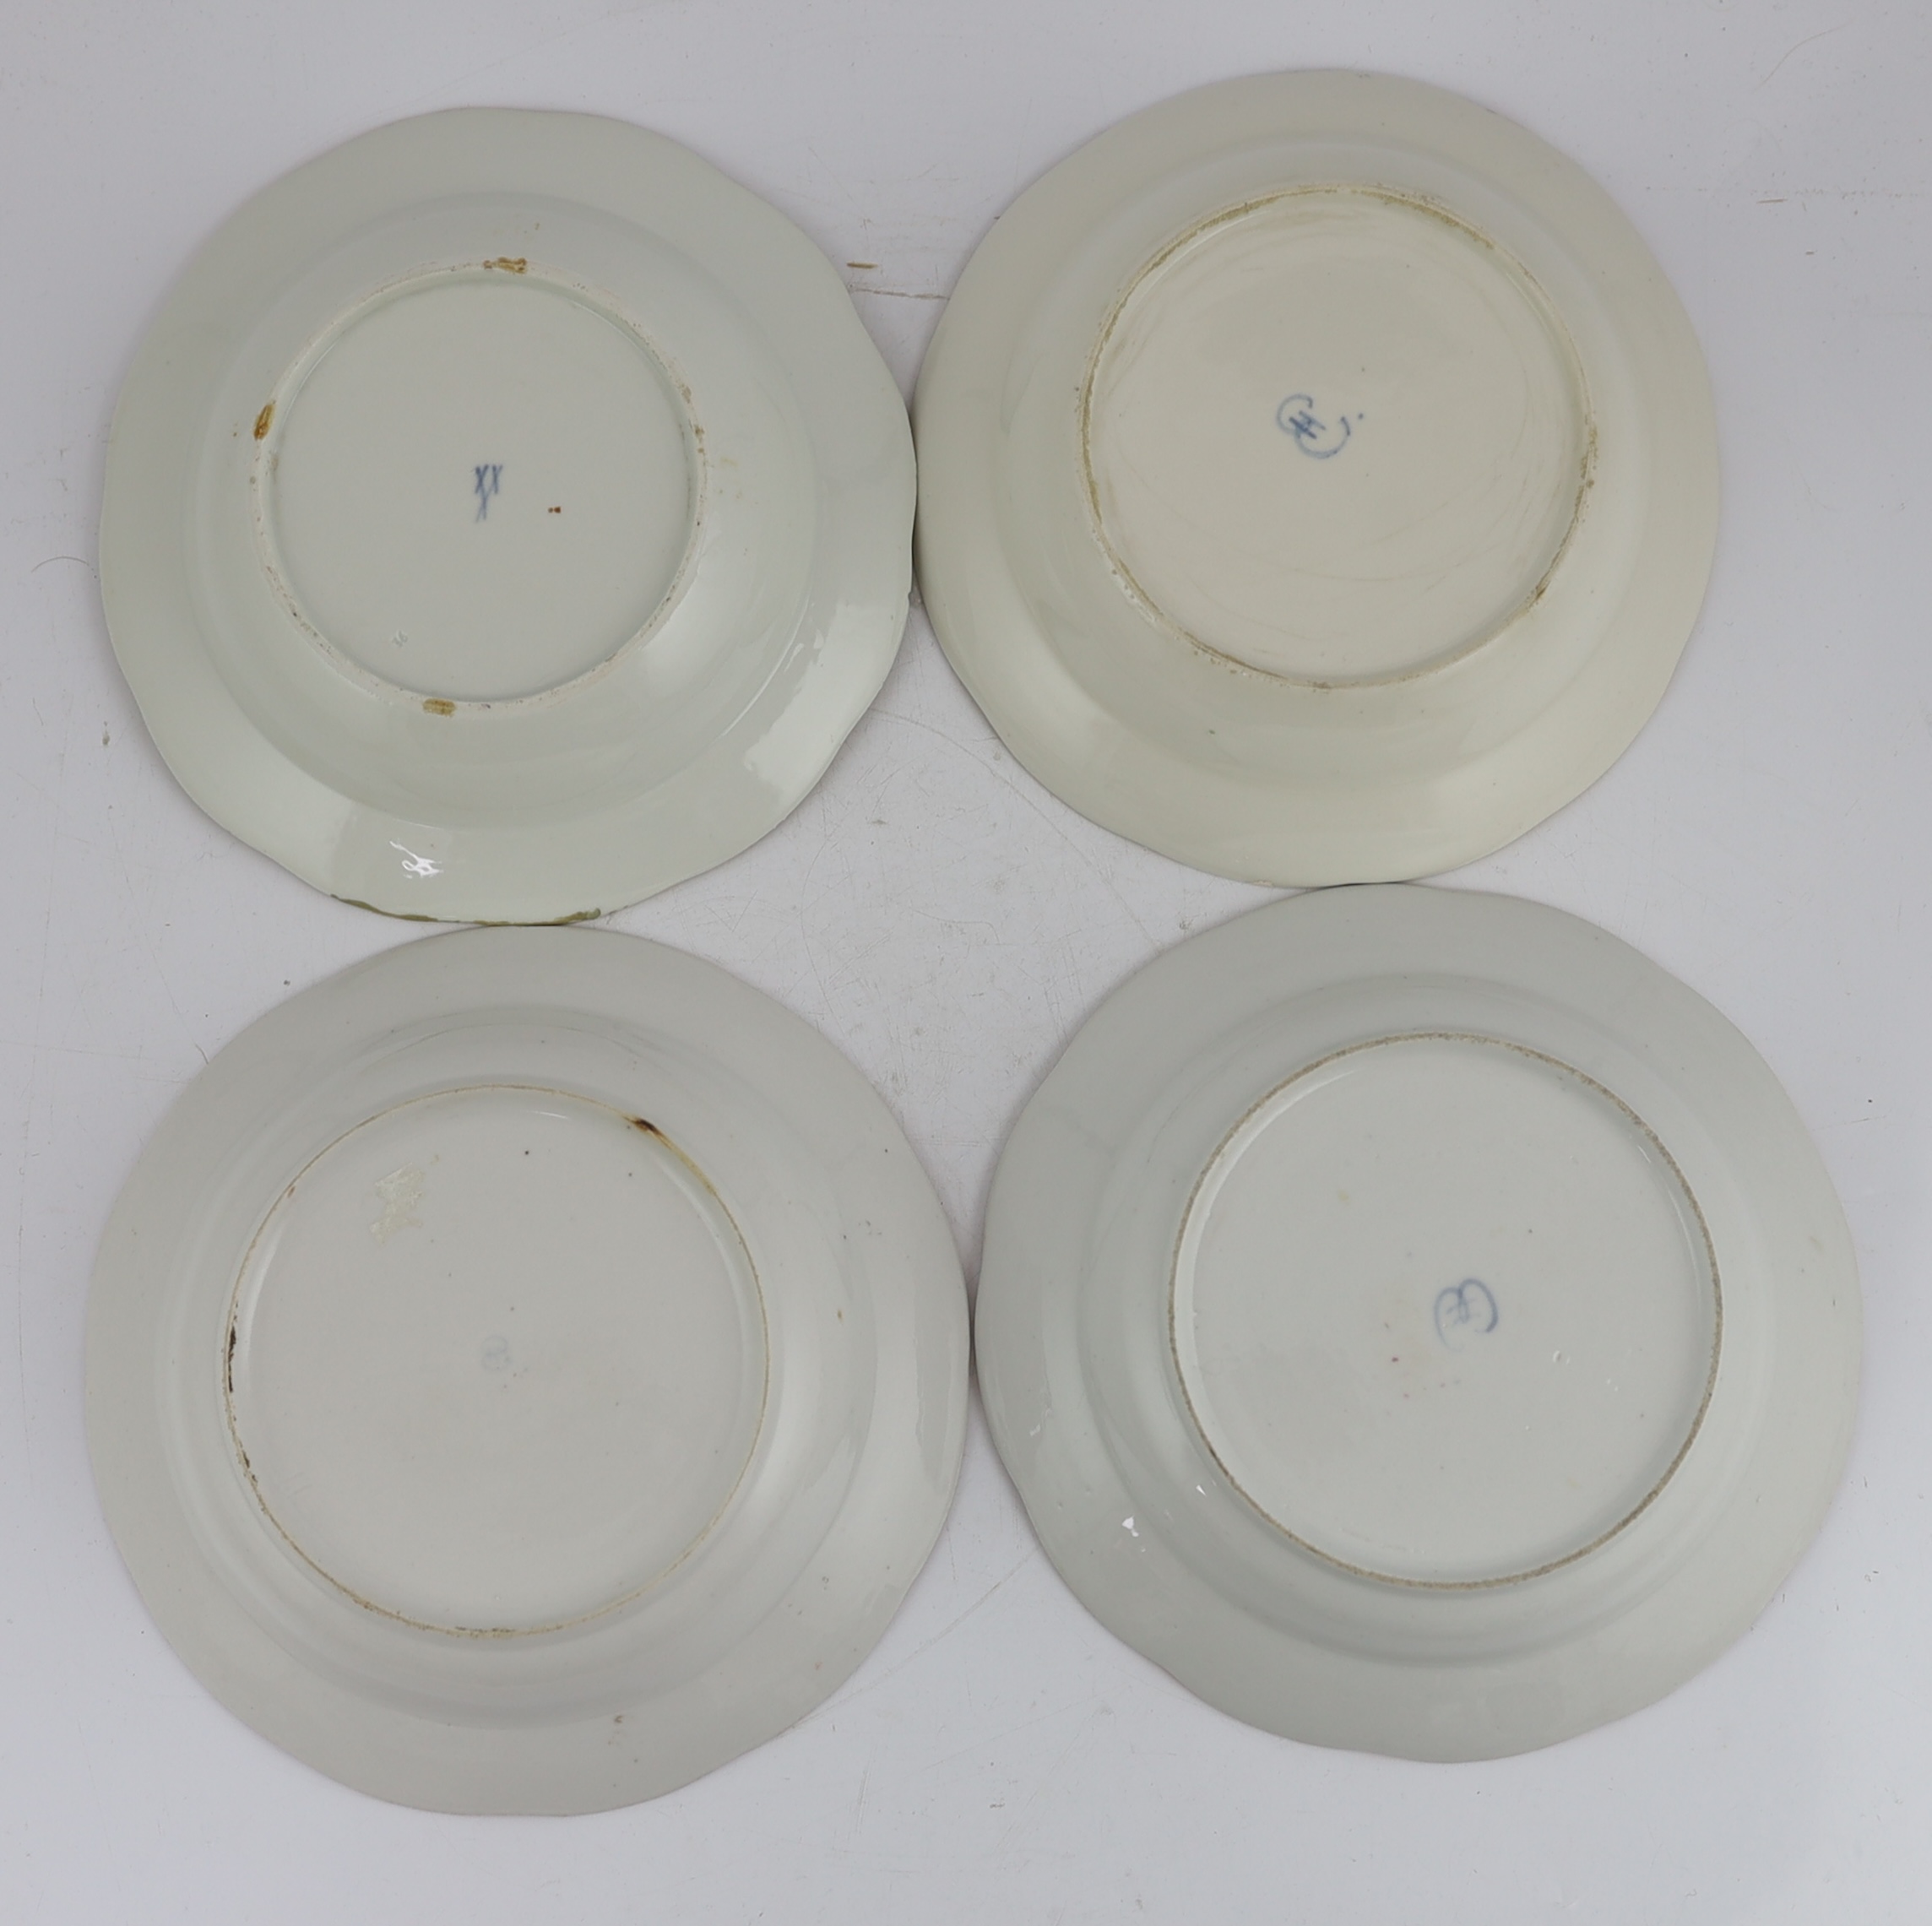 Three Russian Imperial porcelain soup plates from Catherine the Great (1762-96) ‘Everyday Service’ and one similar Meissen soup plate